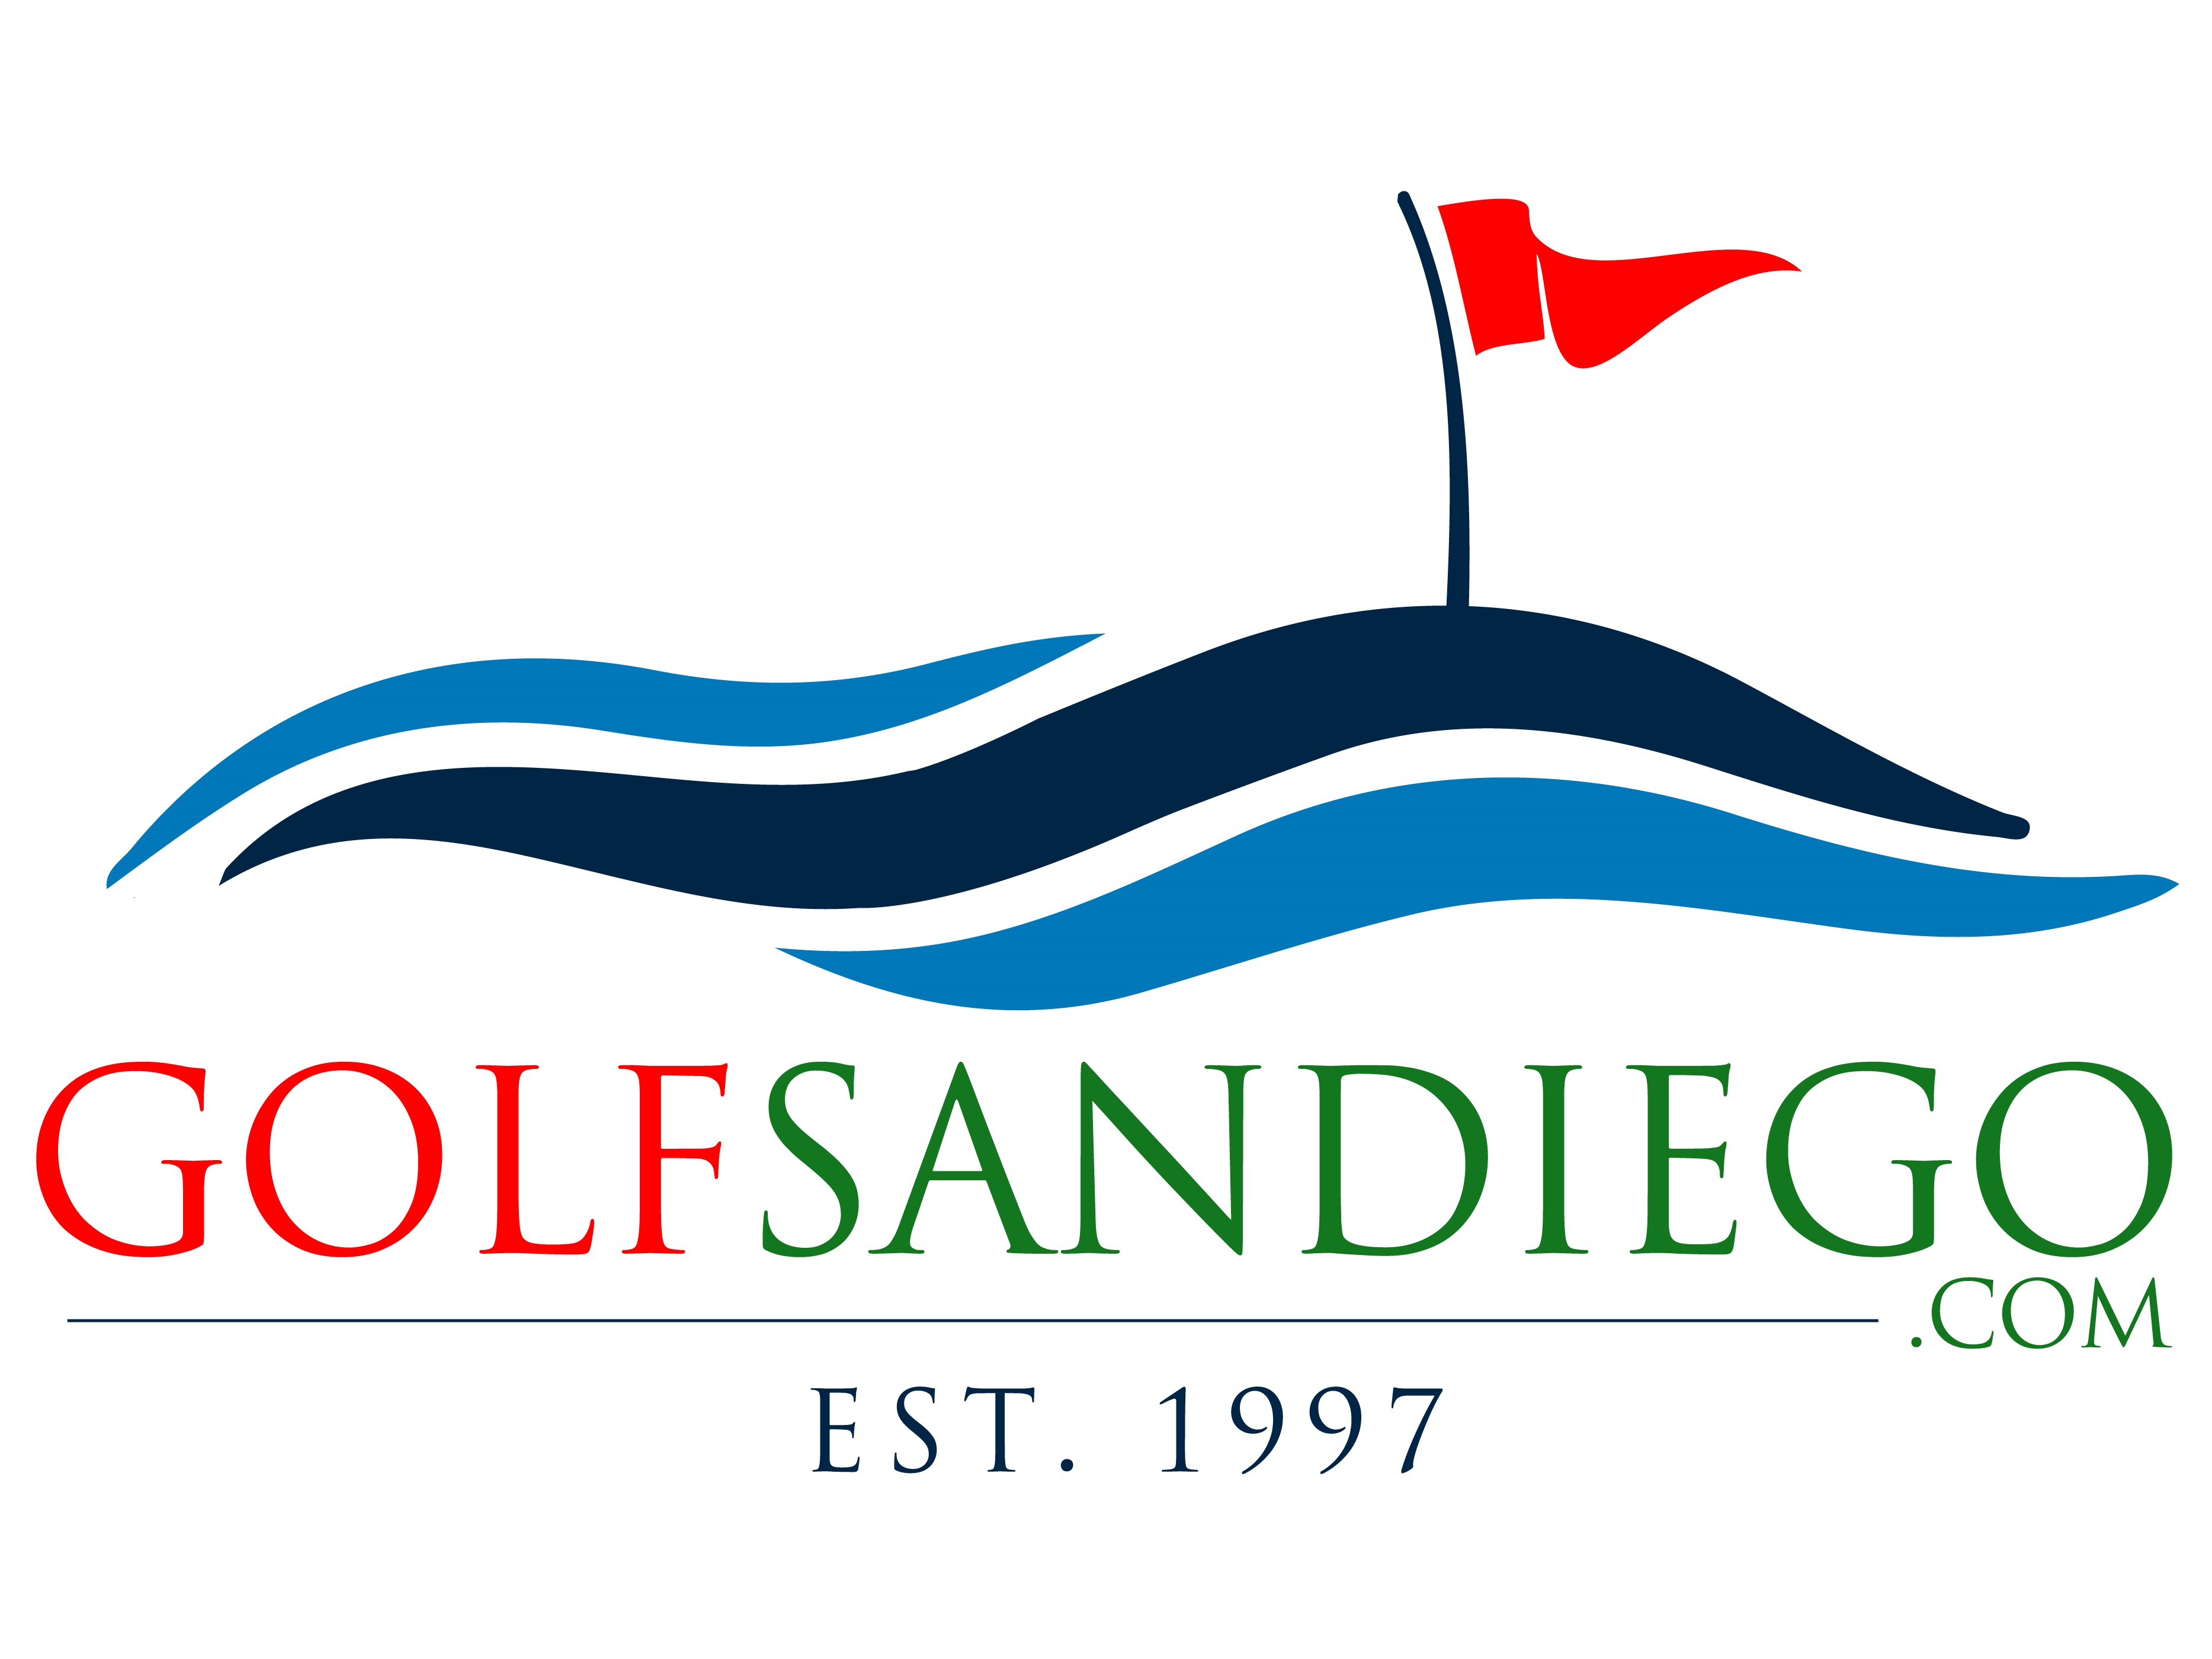 GolfSanDiego.com - #1 Source for Torrey Pines Golf Course reservations and more